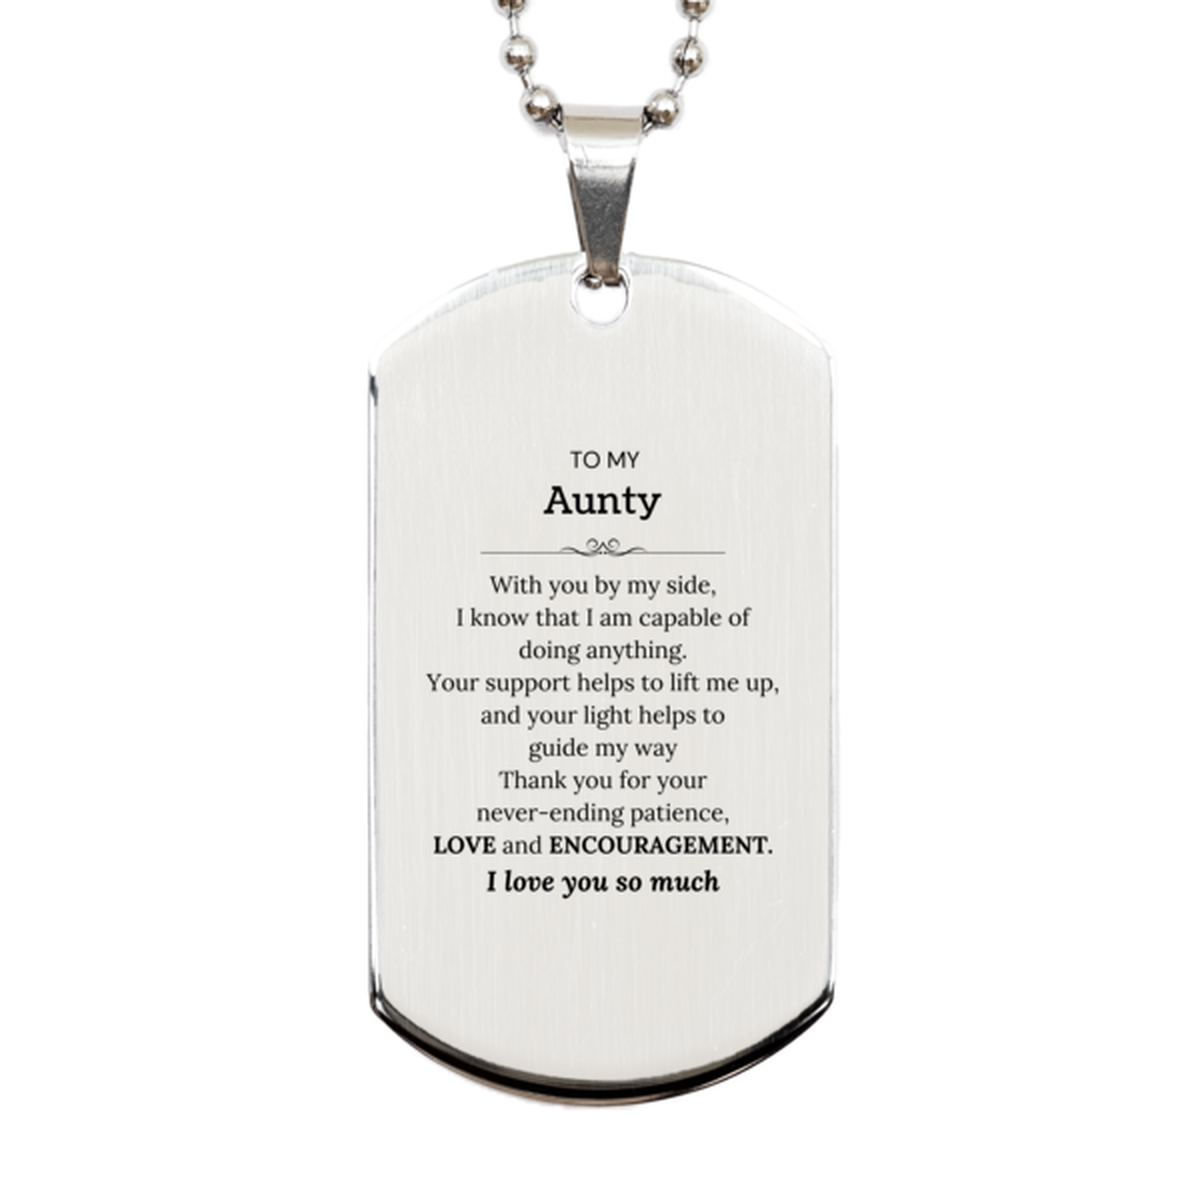 Appreciation Aunty Silver Dog Tag Gifts, To My Aunty Birthday Christmas Wedding Keepsake Gifts for Aunty With you by my side, I know that I am capable of doing anything. I love you so much